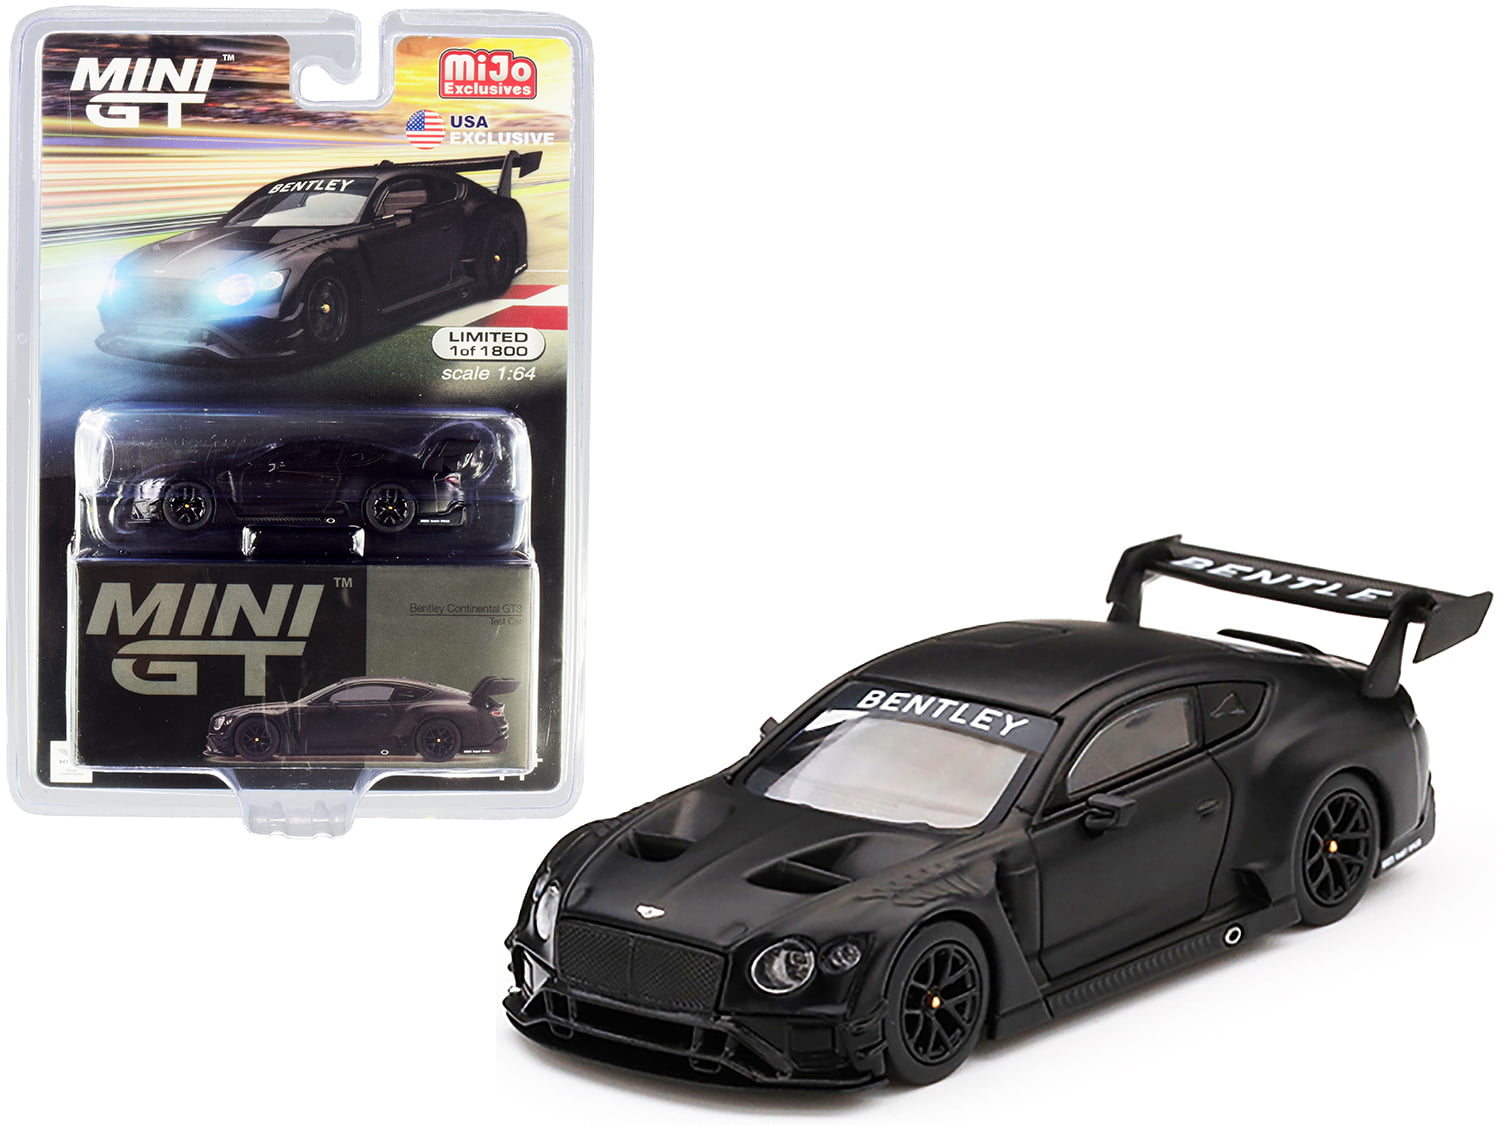 CMJ Remote Control 1:18 Scale 2.4Ghz Officially Licensed Audi R8 GT Racing Car 